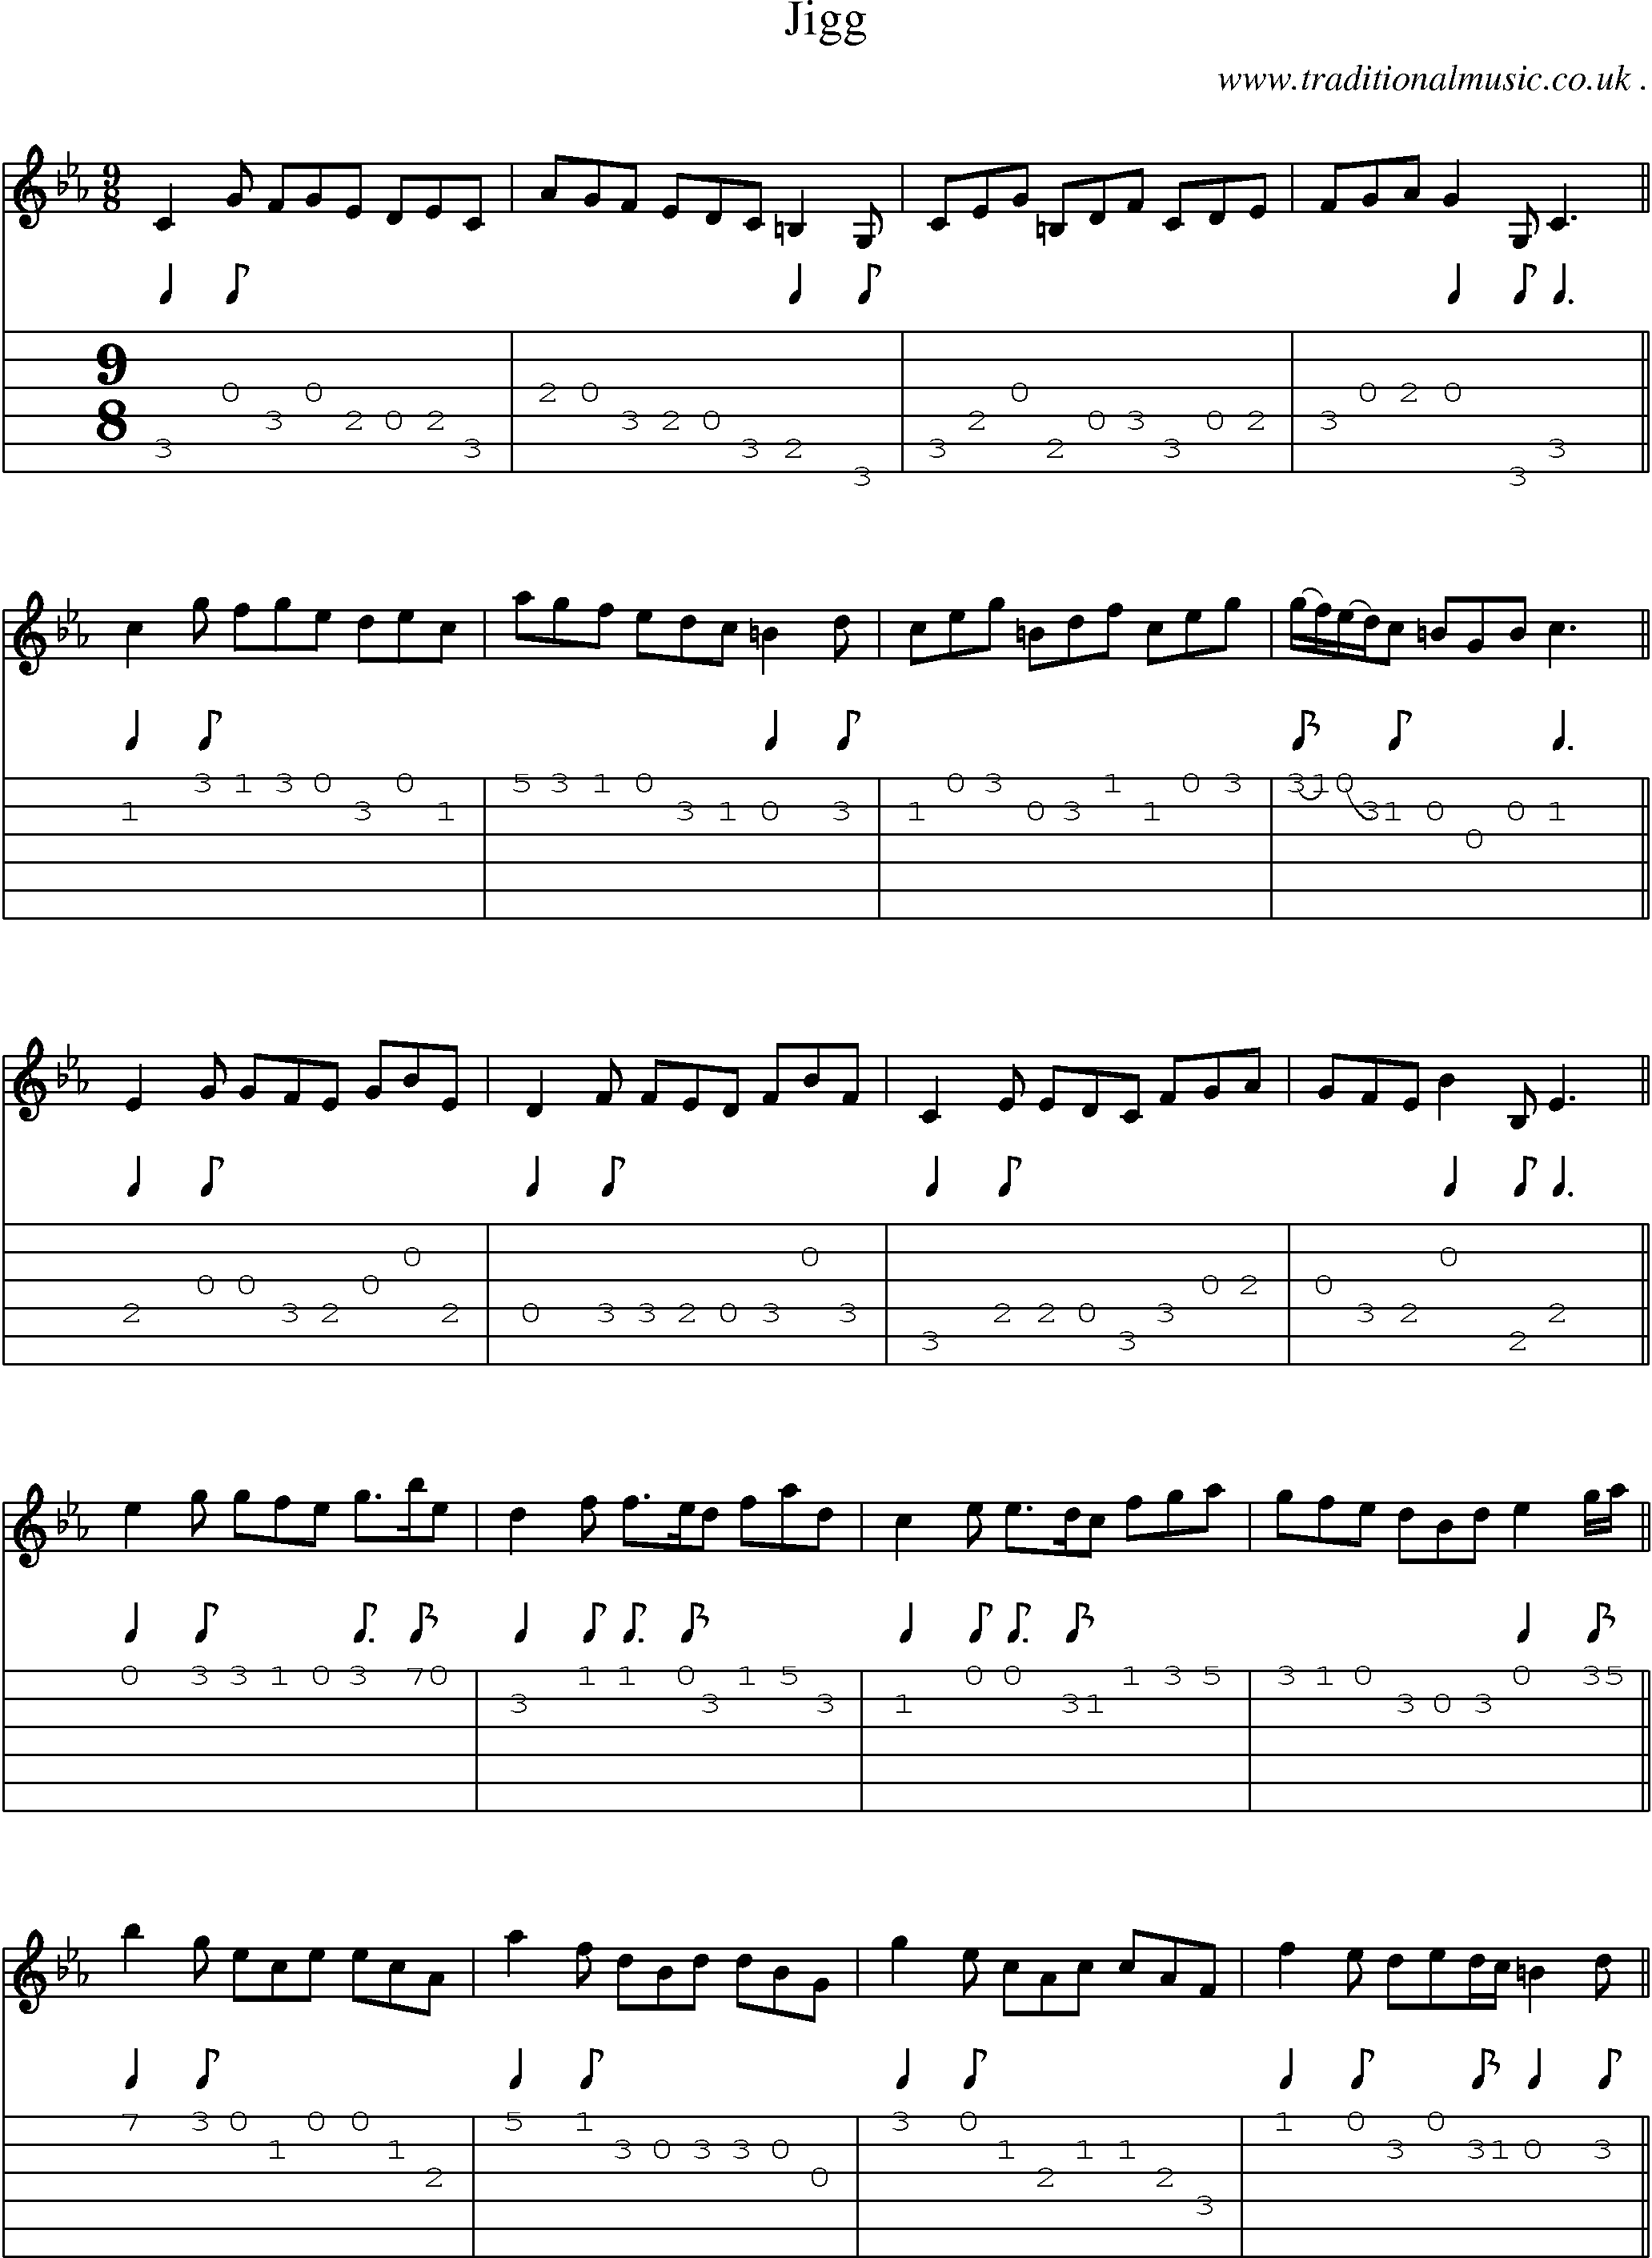 Sheet-Music and Guitar Tabs for Jigg